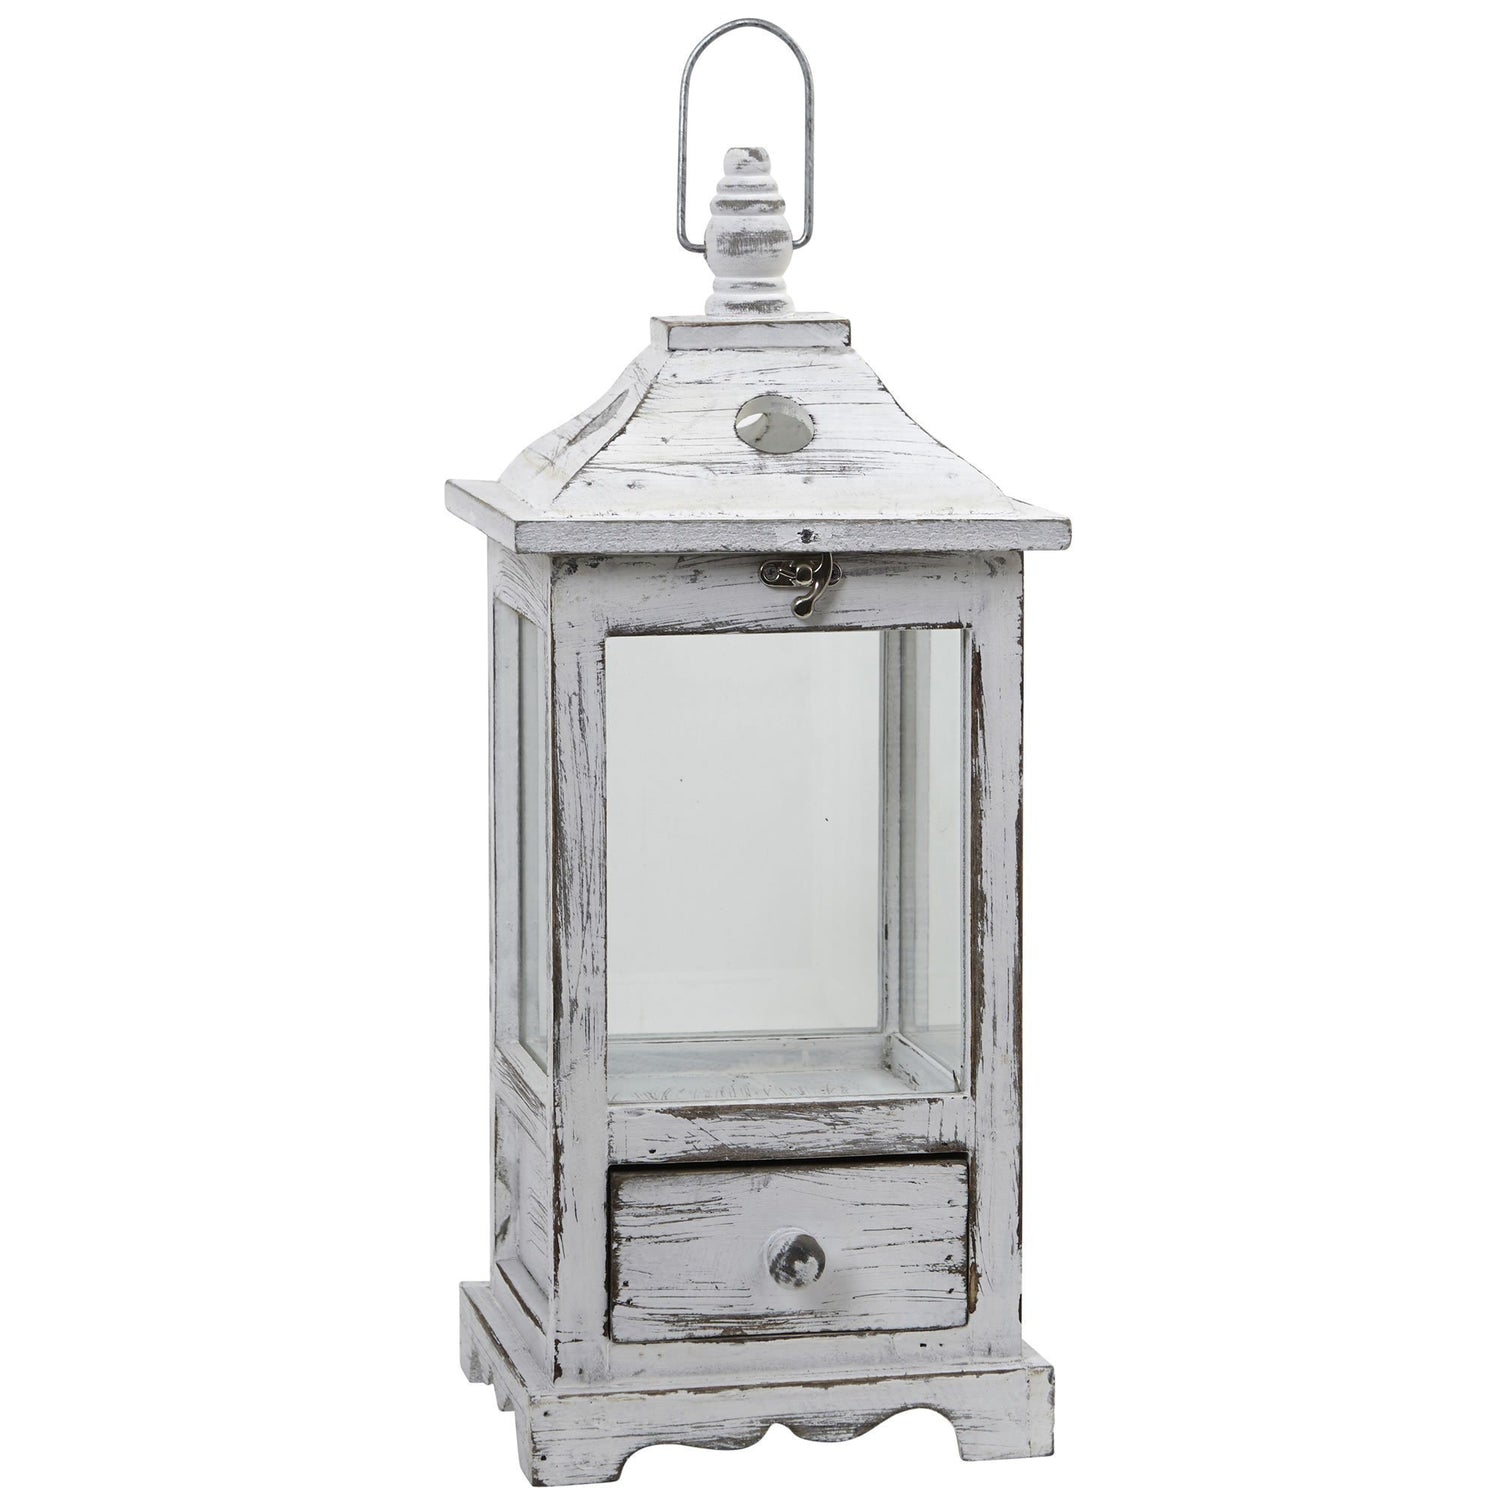 Distressed Wooden Lantern with Drawers